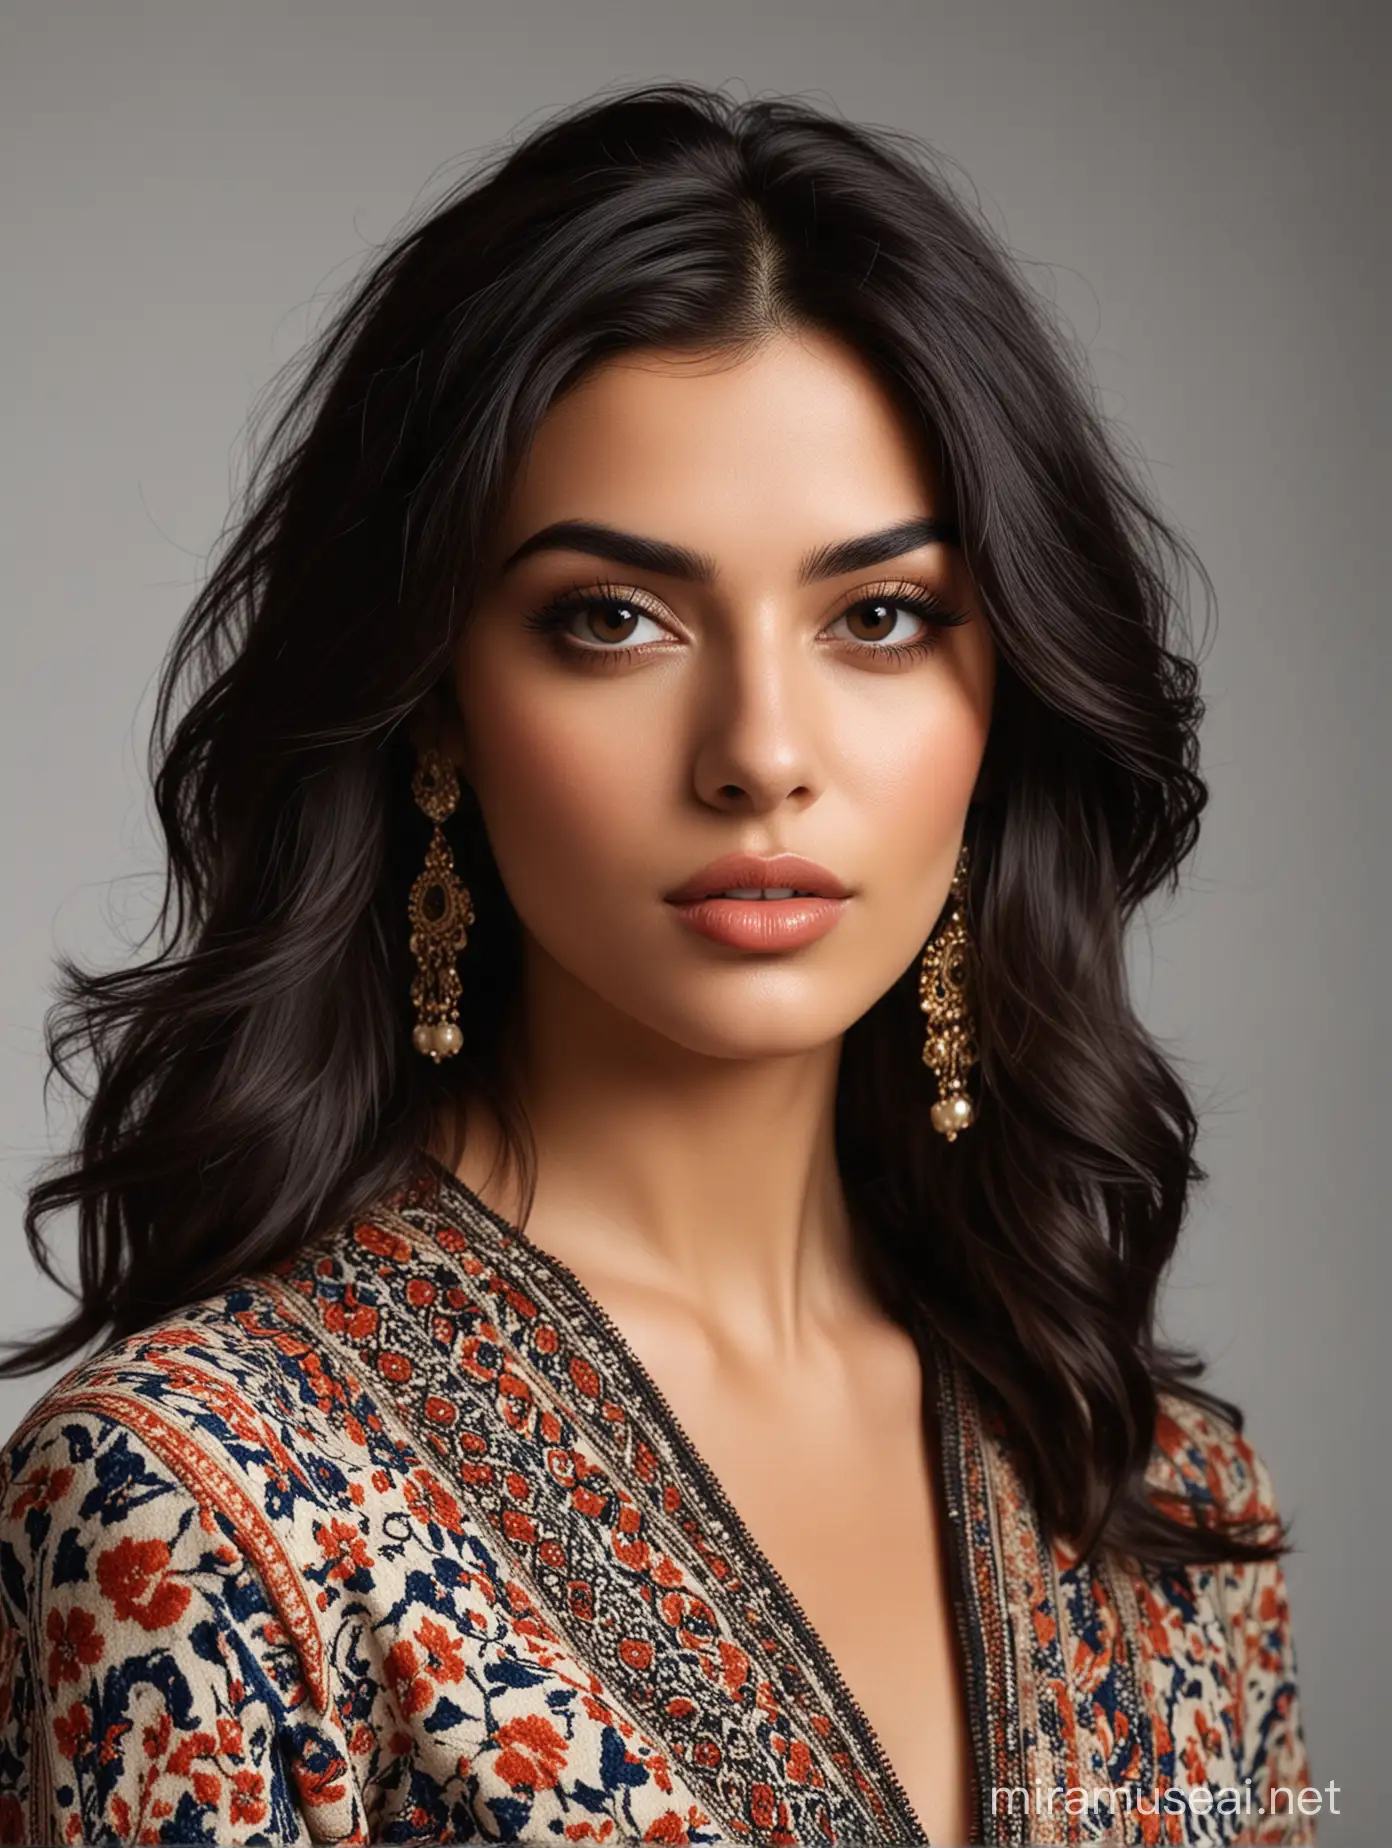 Create an ultra-realistic portrait of a modern Persian model exuding confidence and sophistication. The model has sleek, shoulder-length dark hair styled in loose waves. Their complexion is radiant, with a sun-kissed glow, and their makeup is subtle yet enhancing their features, emphasizing their expressive eyes and full lips. The model is dressed in high-fashion attire, perhaps a chic ensemble blending traditional Persian elements with contemporary flair. Think of bold patterns, luxurious fabrics, and stylish accessories. Place the model against a backdrop that reflects modern elegance, such as a sleek urban setting with architectural elements or a trendy studio space with soft, diffused lighting. Capture the model's poise and charisma, embodying the fusion of tradition and modernity that defines Persian fashion today